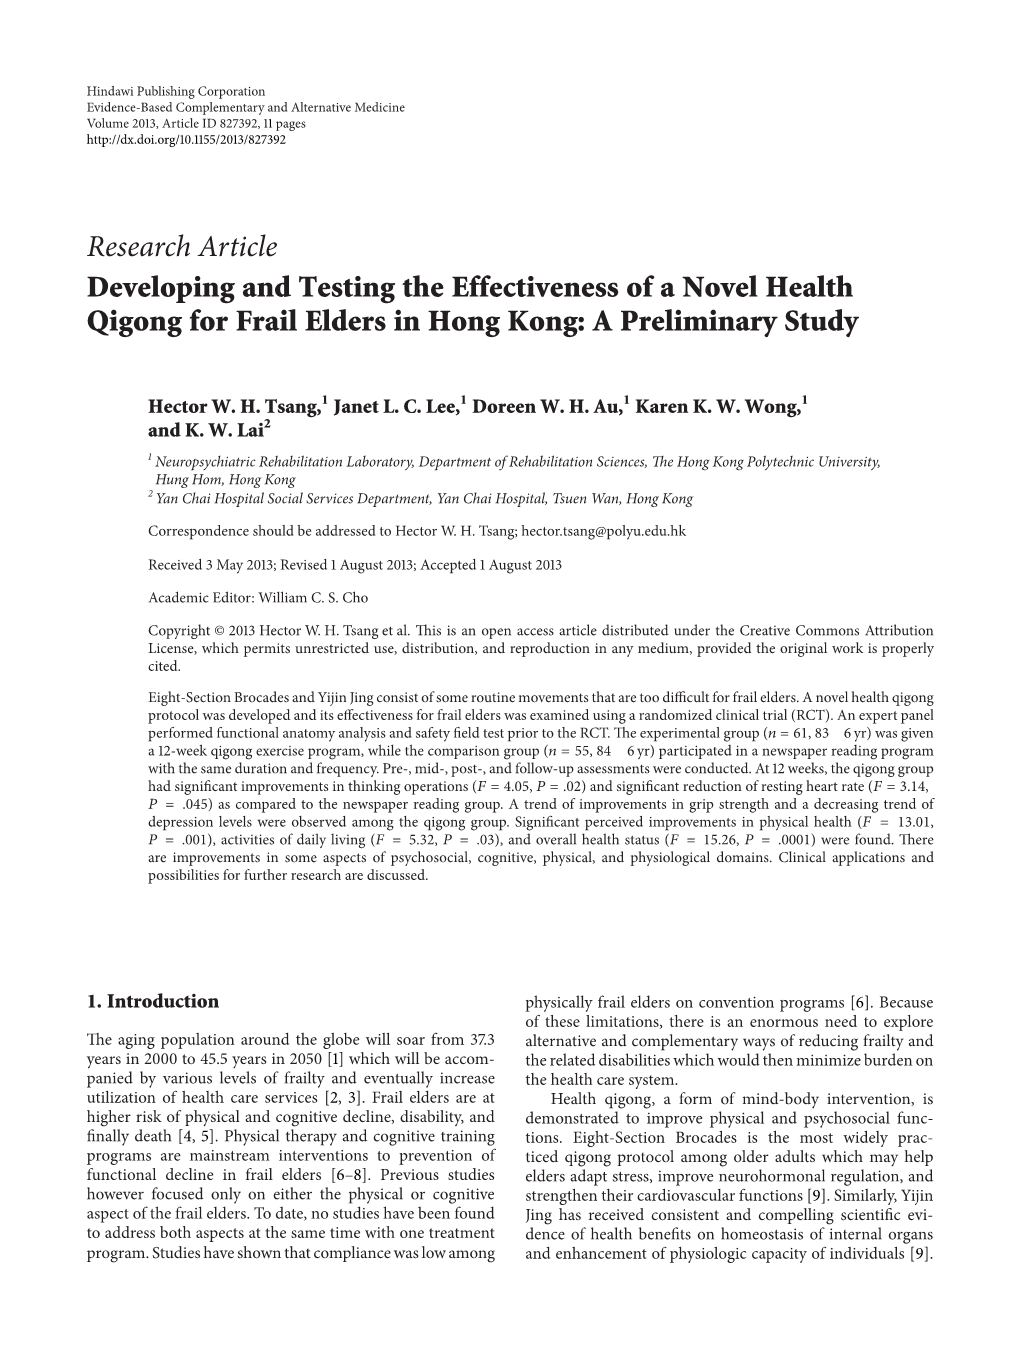 Developing and Testing the Effectiveness of a Novel Health Qigong for Frail Elders in Hong Kong: a Preliminary Study